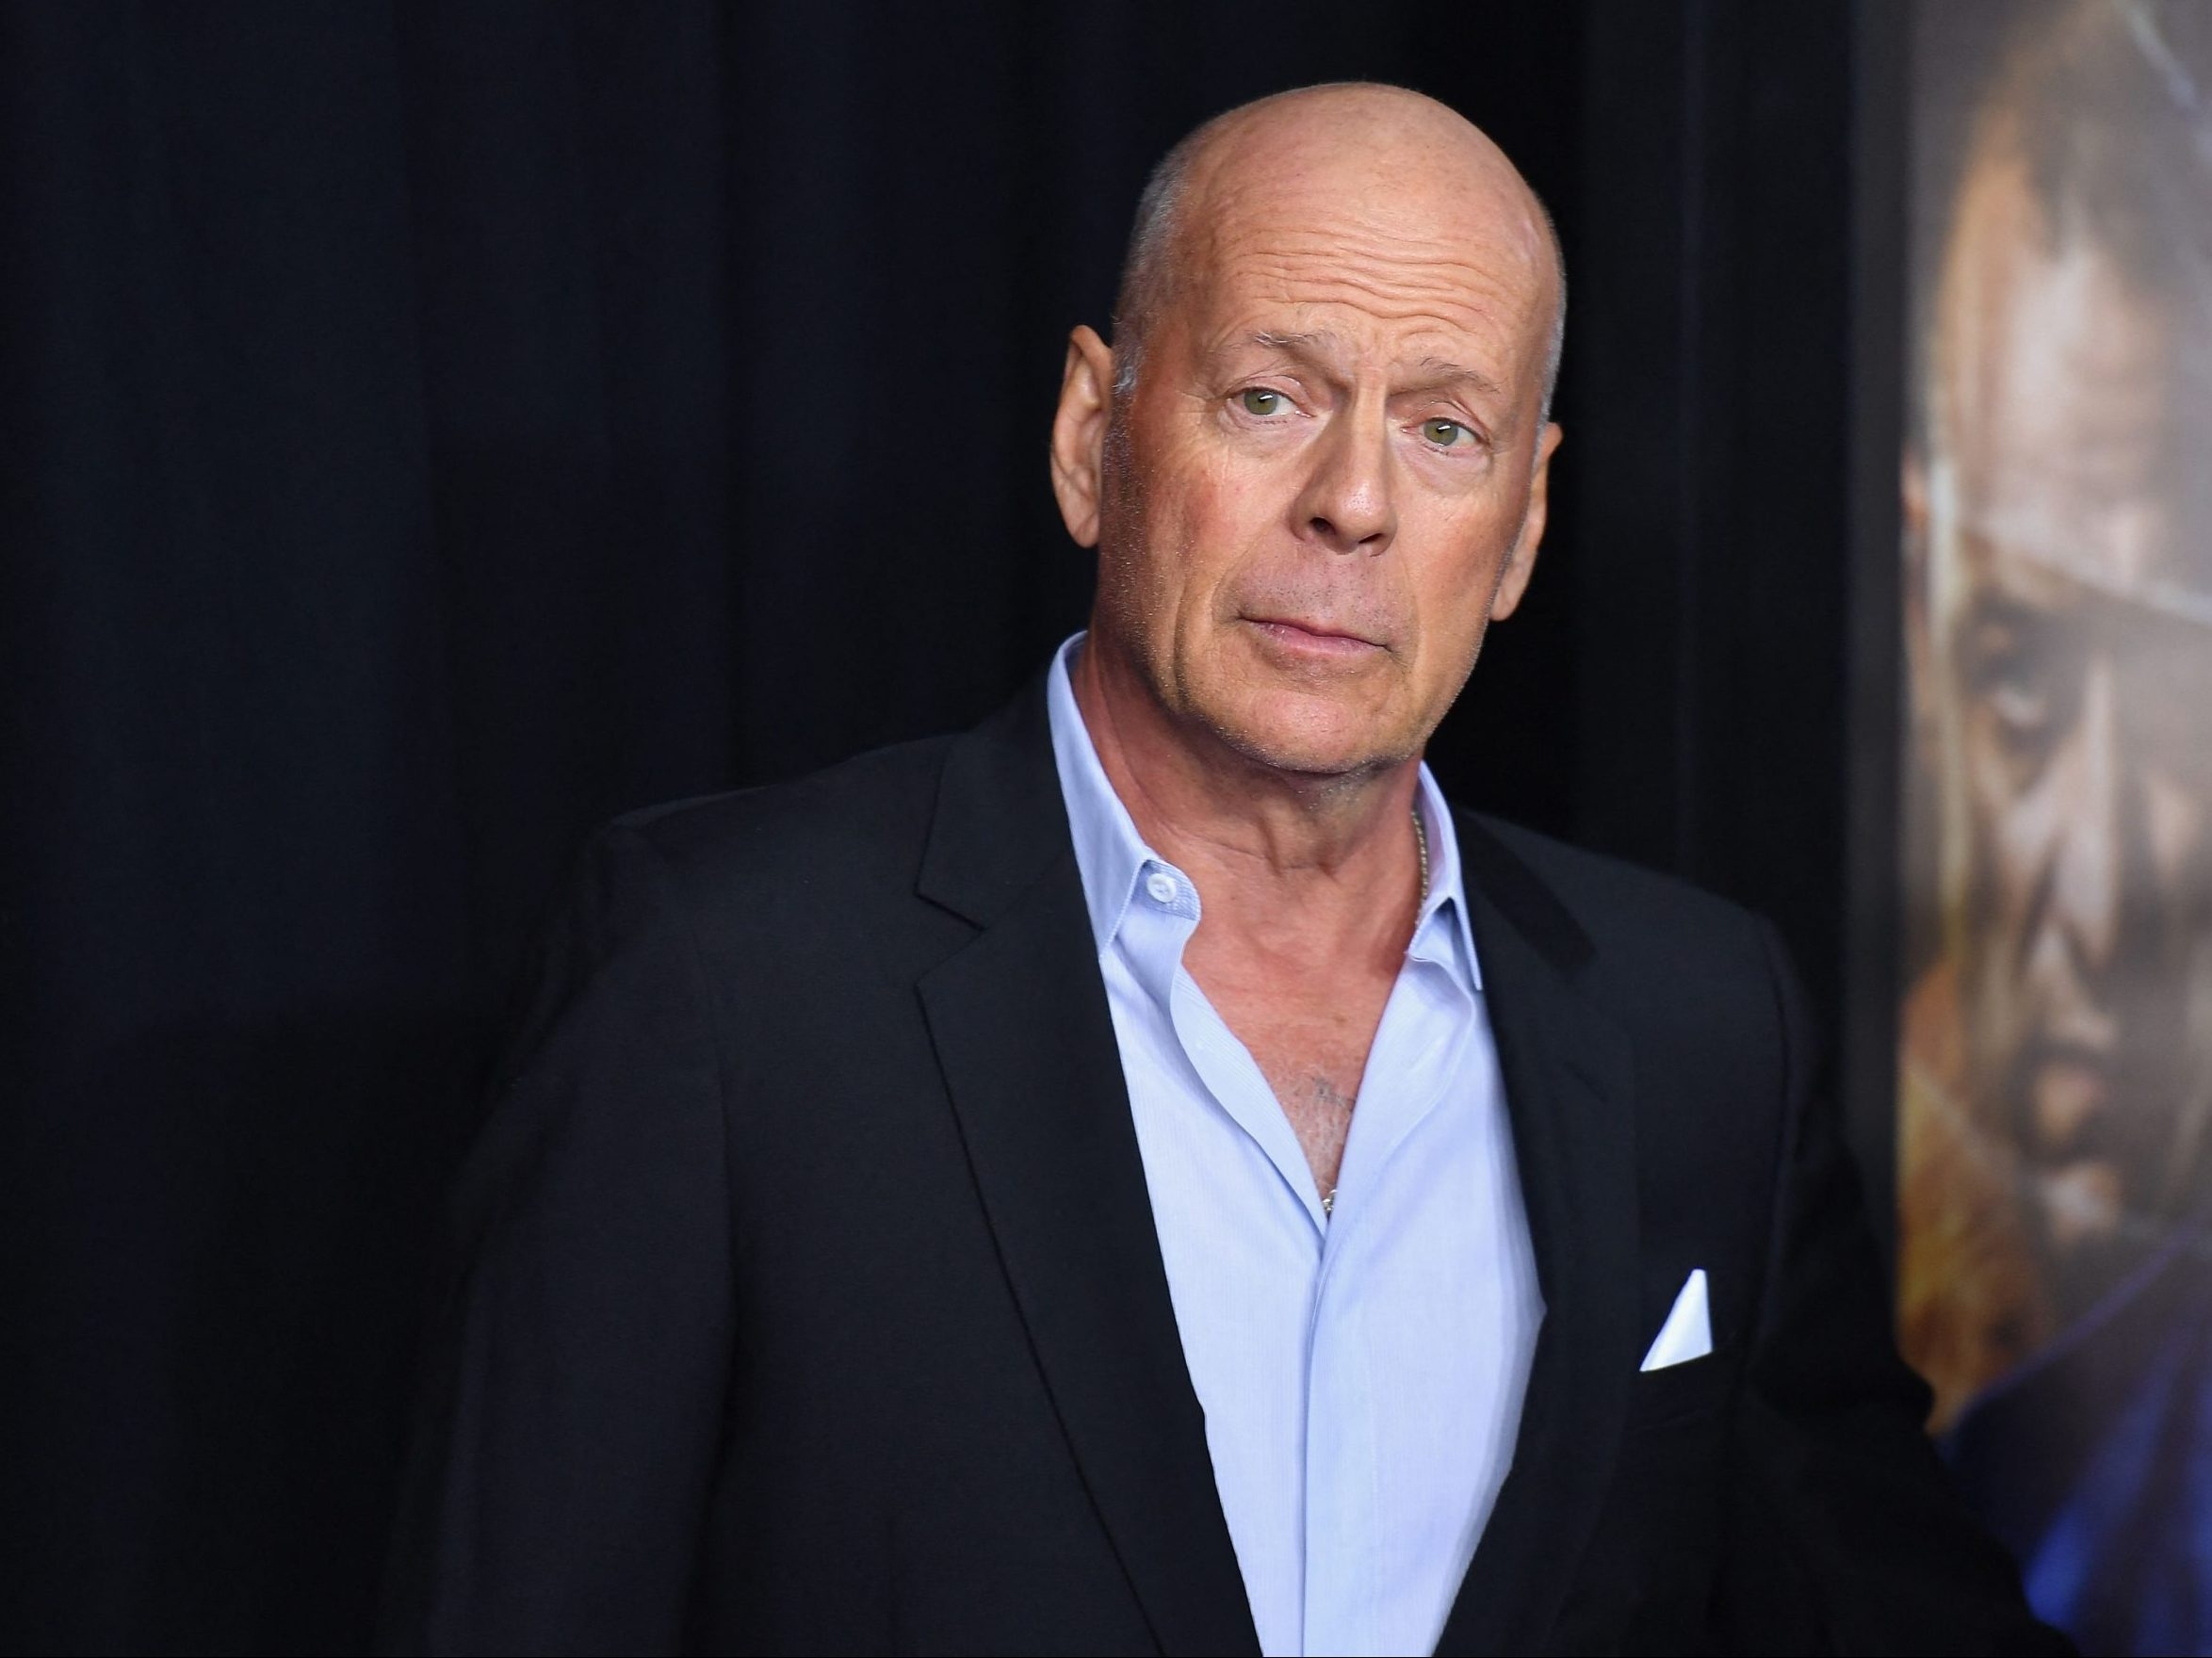 Bruce Willis 'stepping away' from acting after aphasia diagnosis